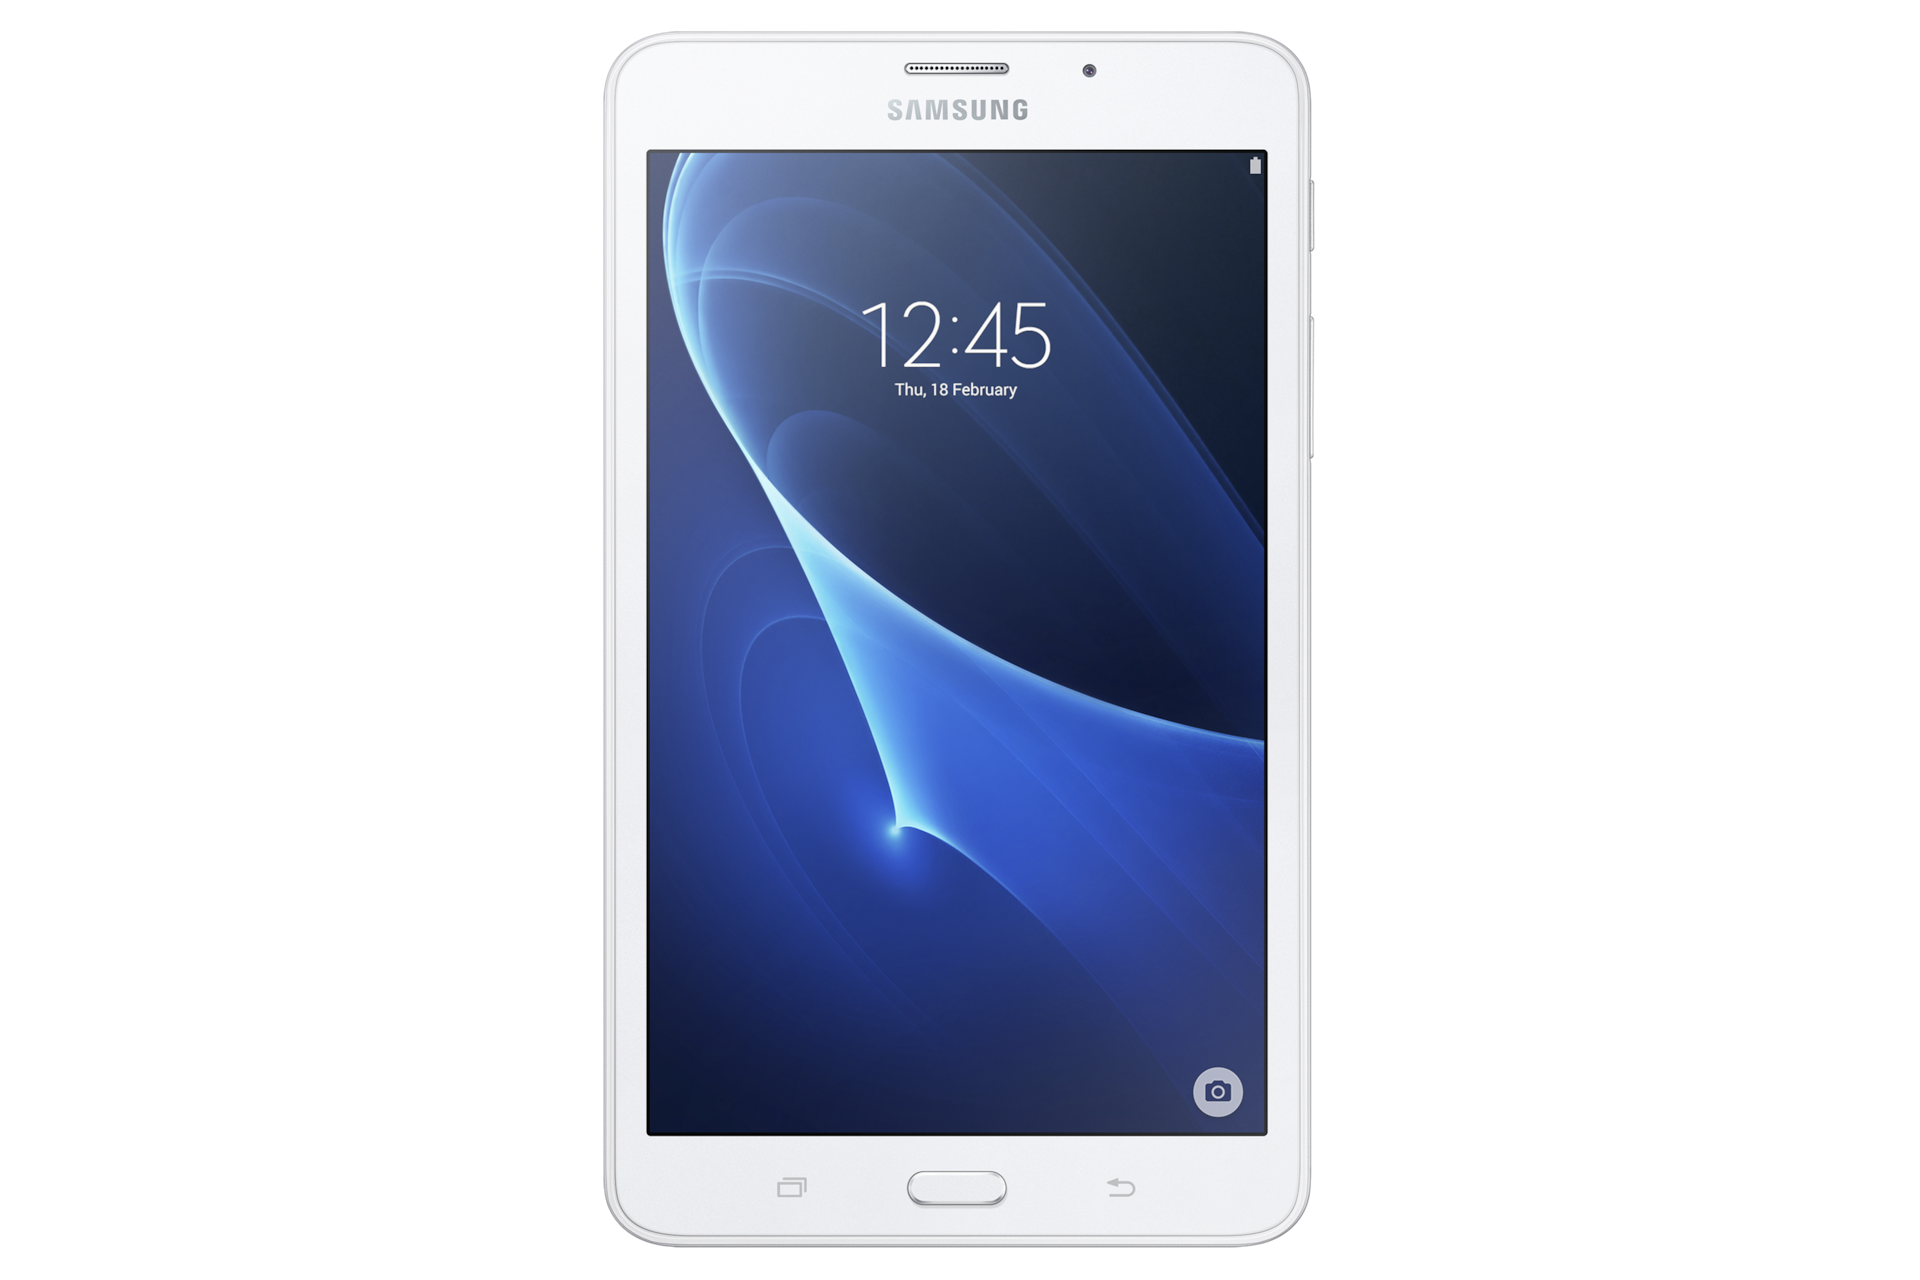 Celcom offers Samsung Galaxy Tab 3 7.0 from RM549